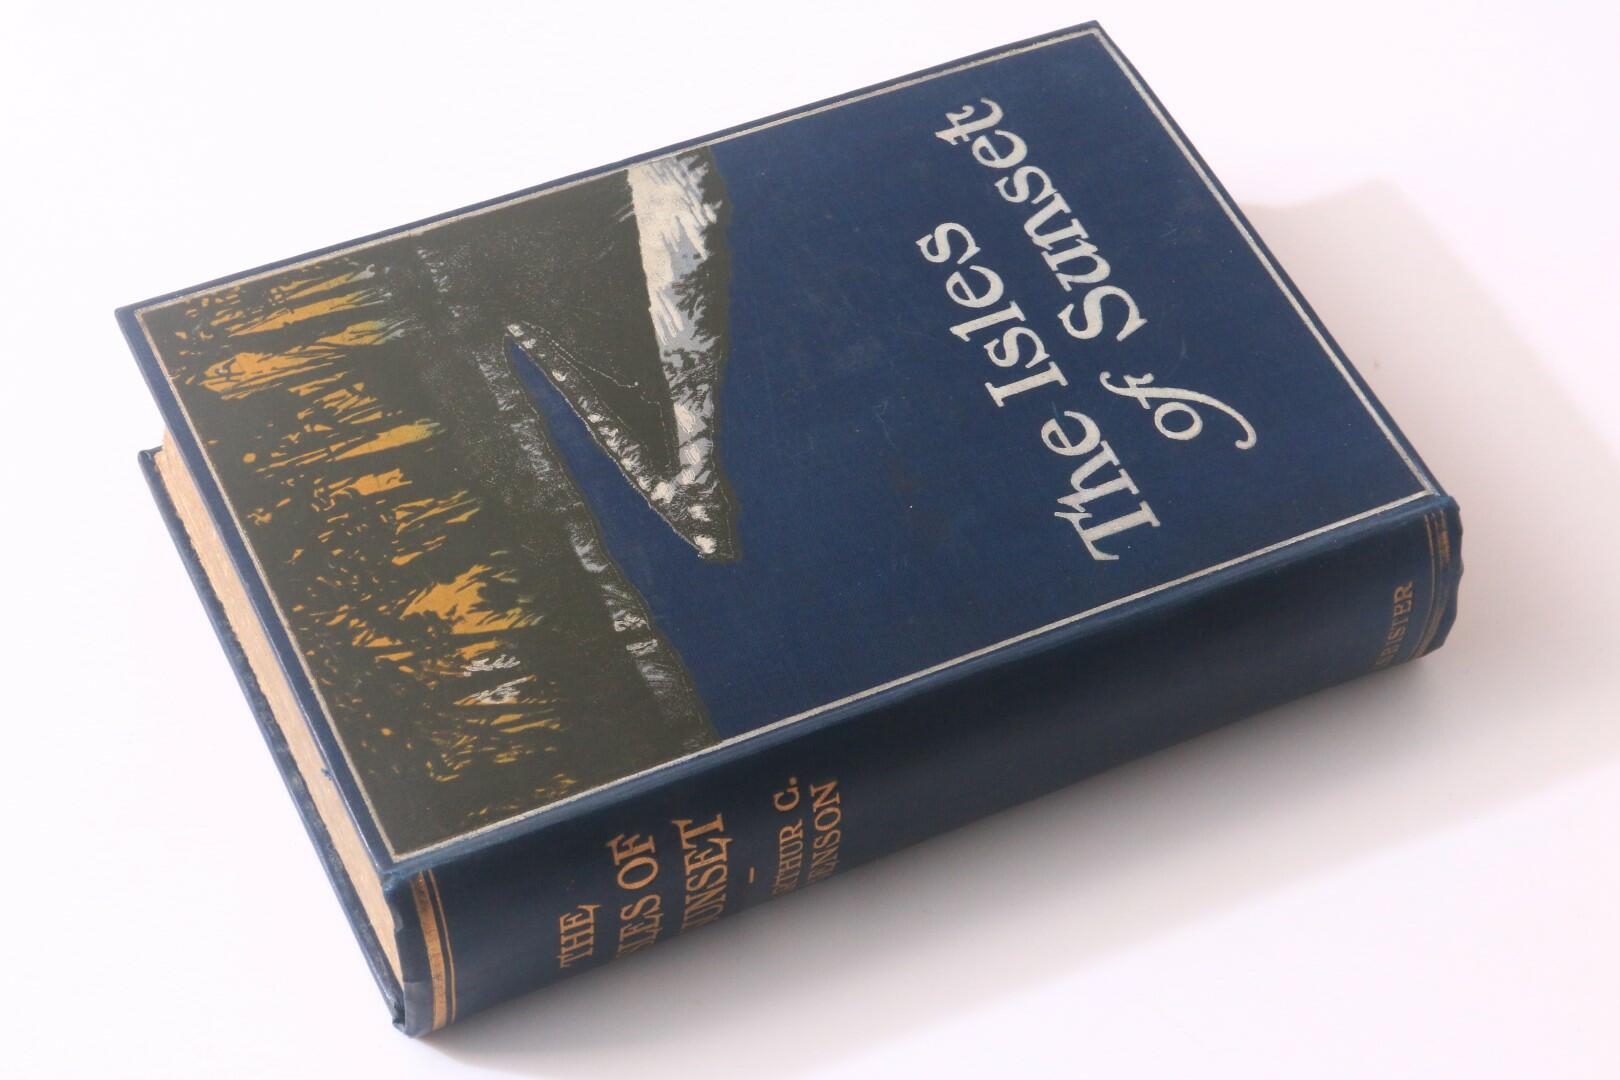 Arthur Christopher Benson - The Isles of Sunset - Isbister, 1904, Signed First Edition.